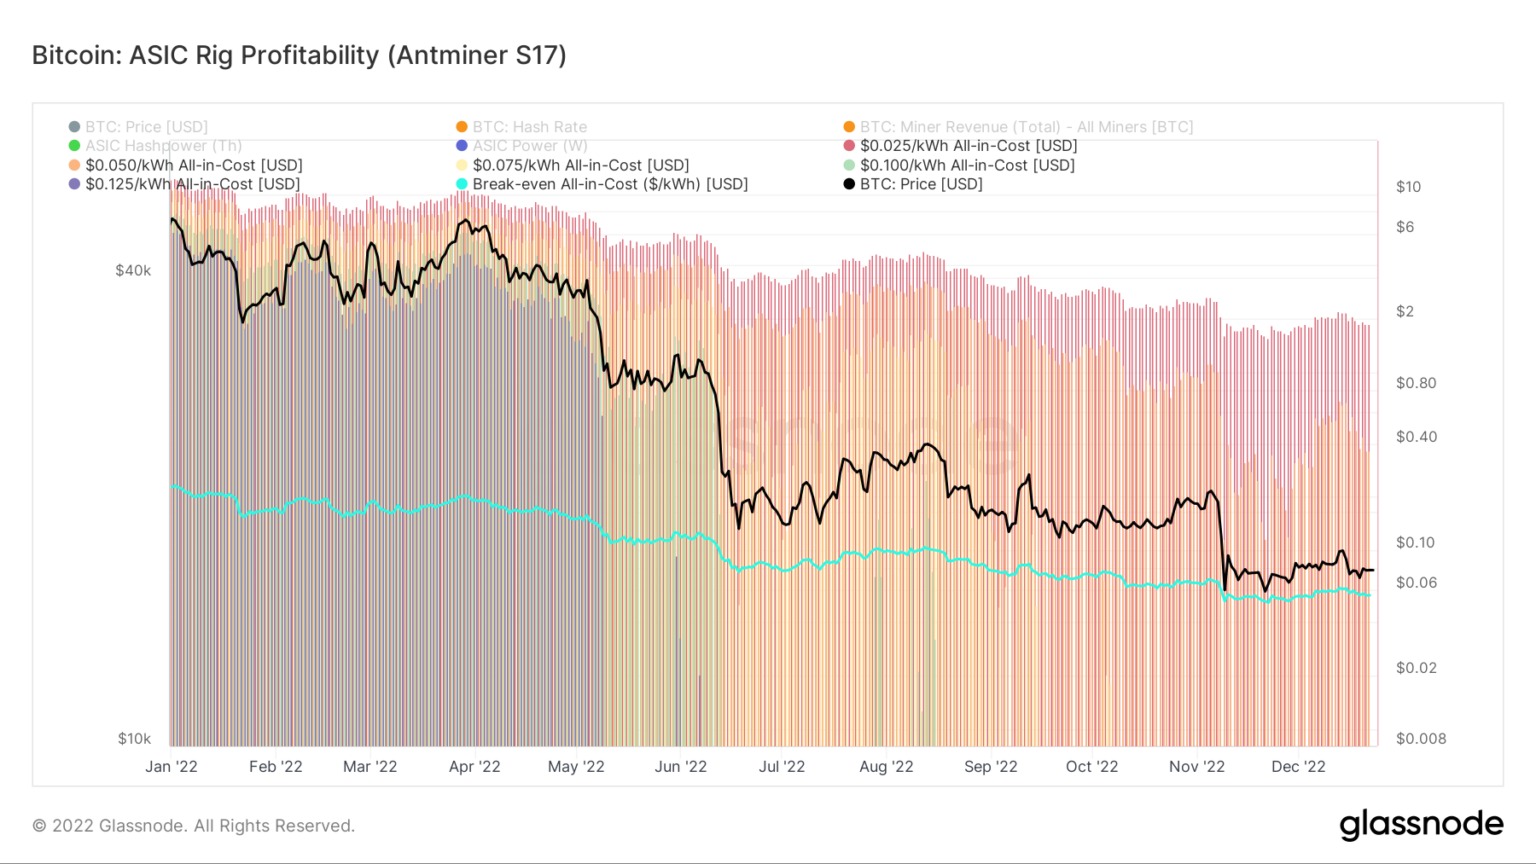 Mining profitability for the Antminer S17 in 2022 (Fonte: Glassnode)